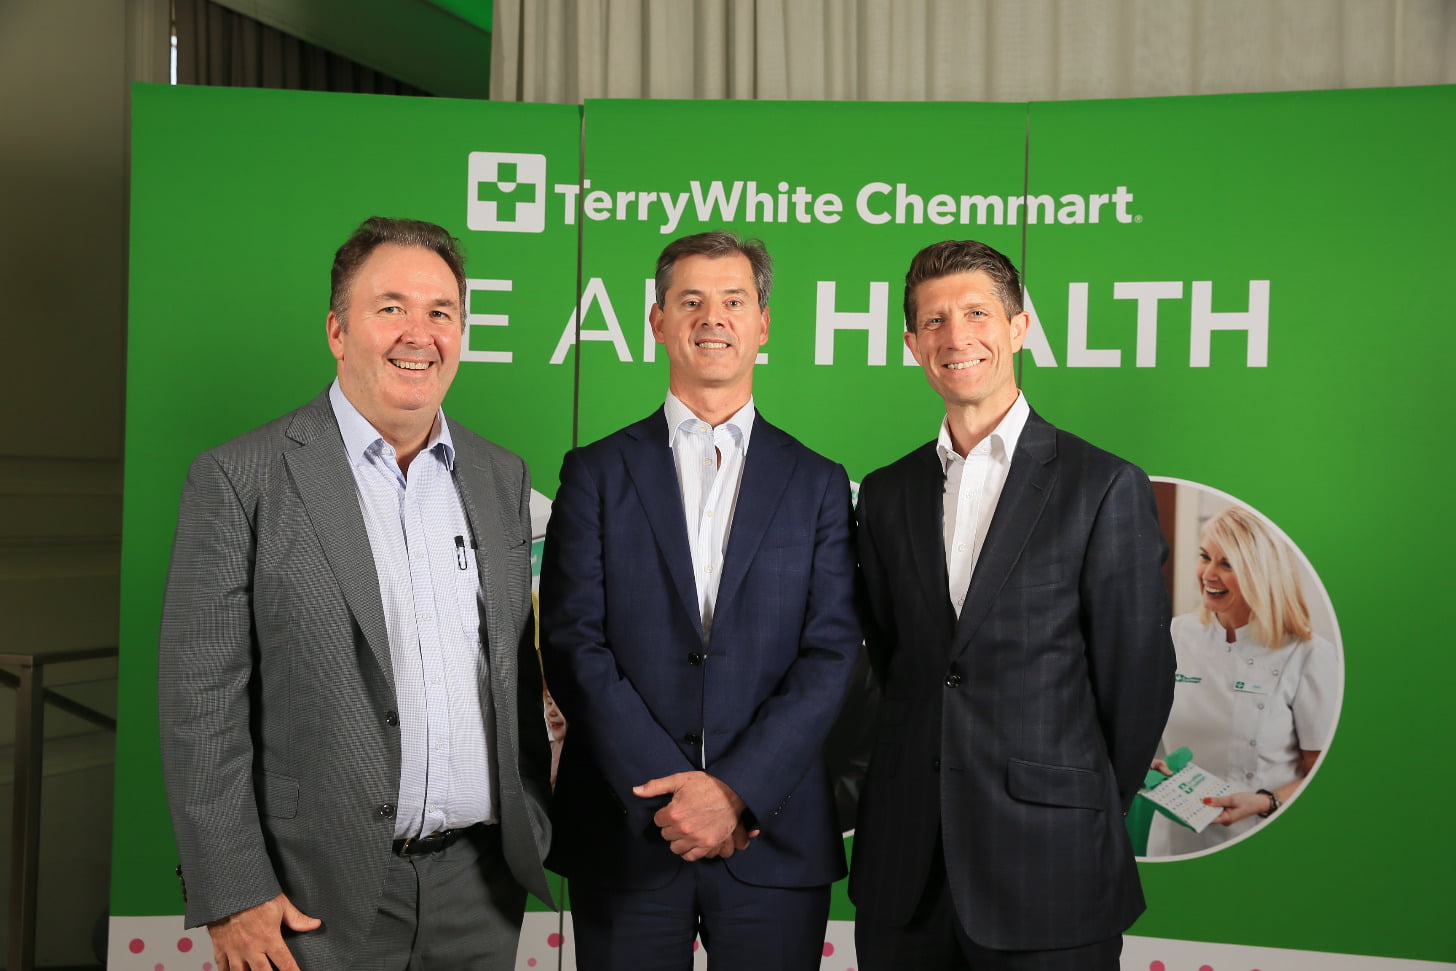 TerryWhite Chemmart CEO Anthony White, EBOS Group Chairman John Cullity and TerryWhite Chemmart Chief Operating Officer Duncan Phillips